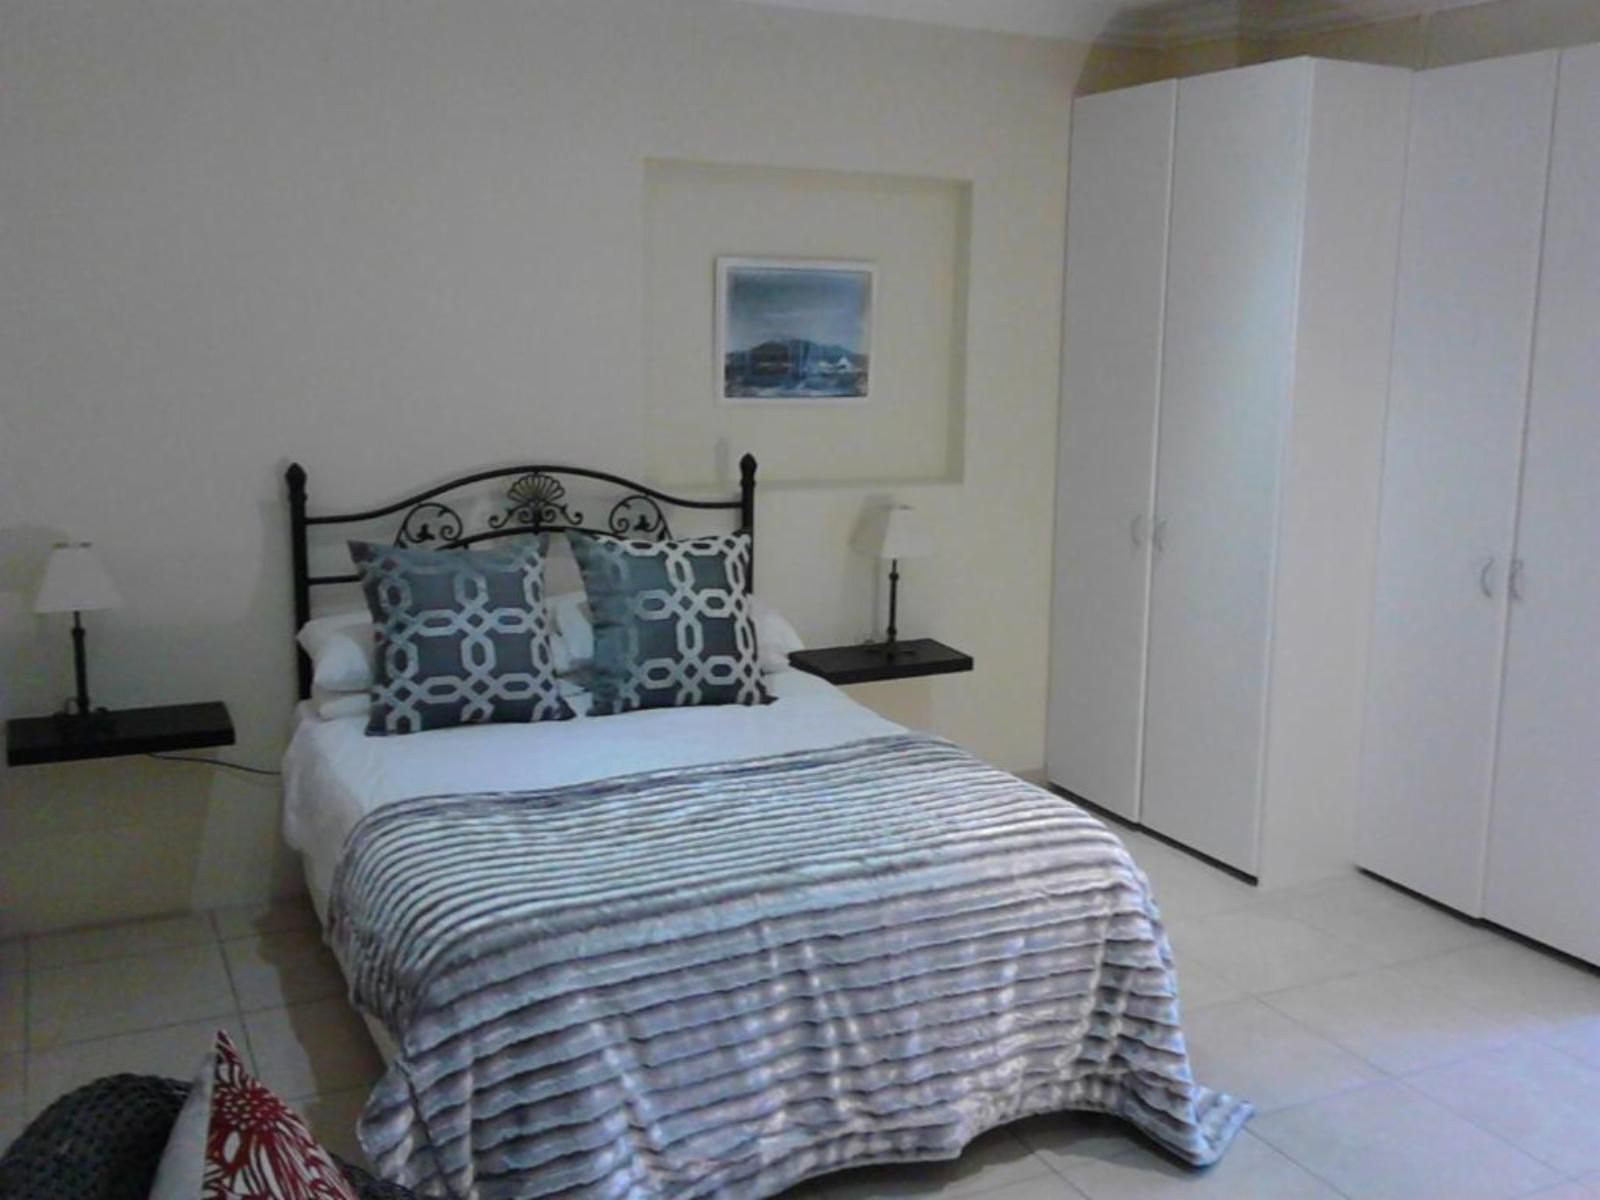 Blouberg Port House Blouberg Cape Town Western Cape South Africa Unsaturated, Bedroom